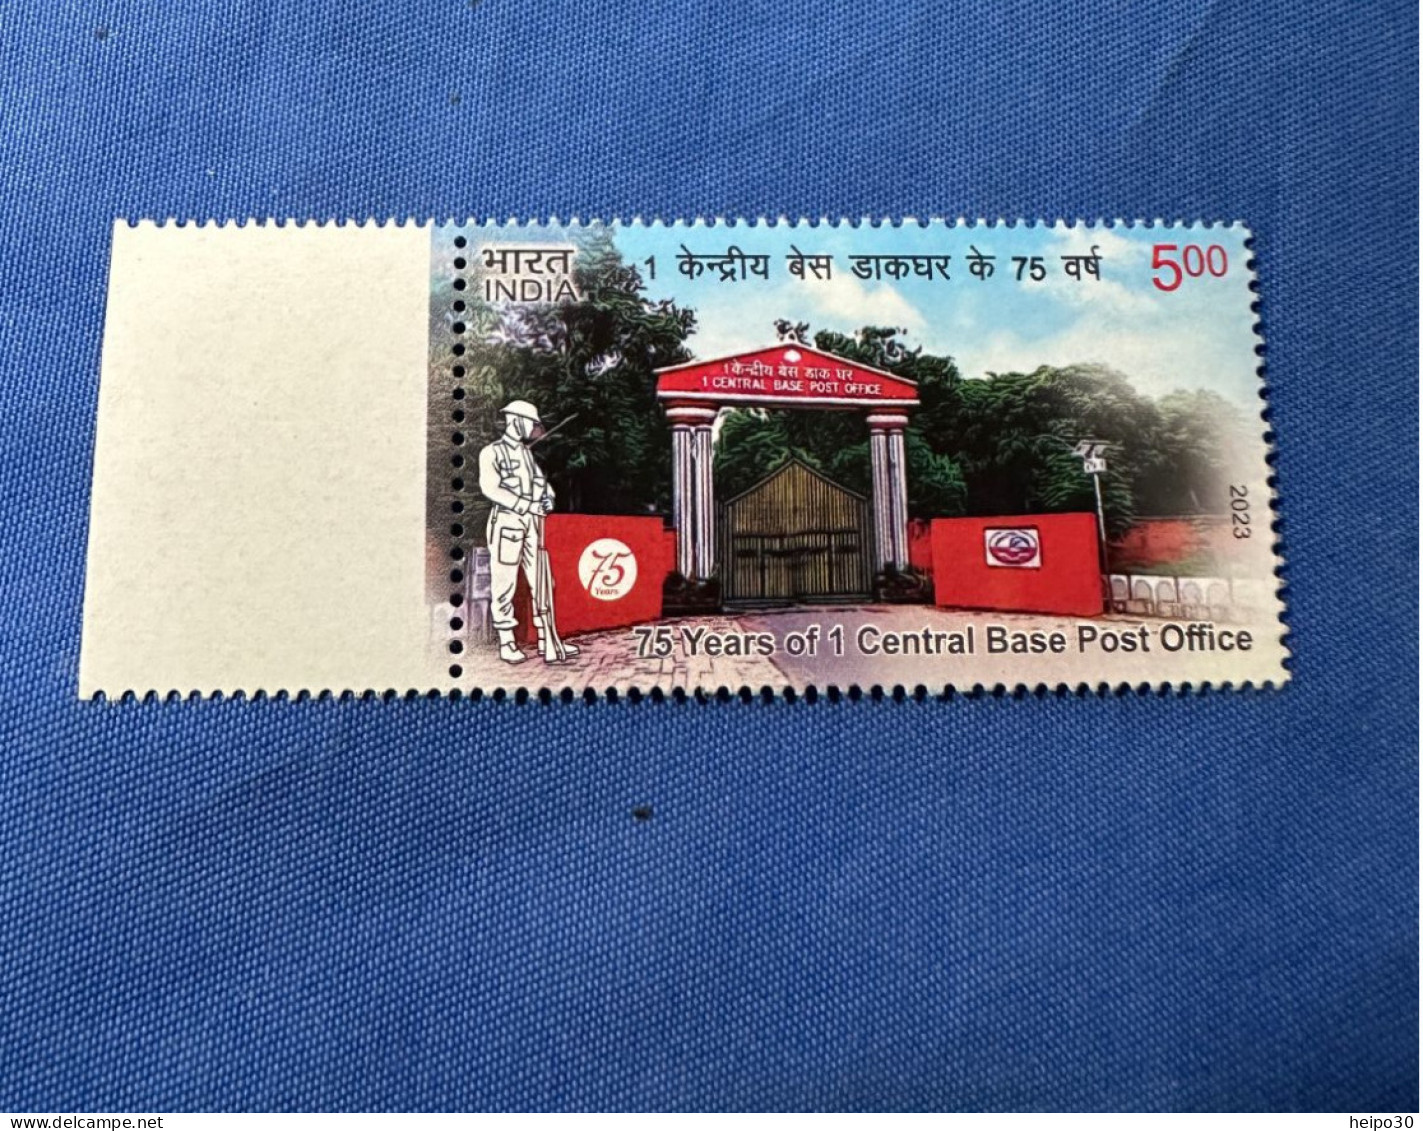 India 2023 Michel 1 Central Base Post Office Rs 5 MNH - Unused Stamps